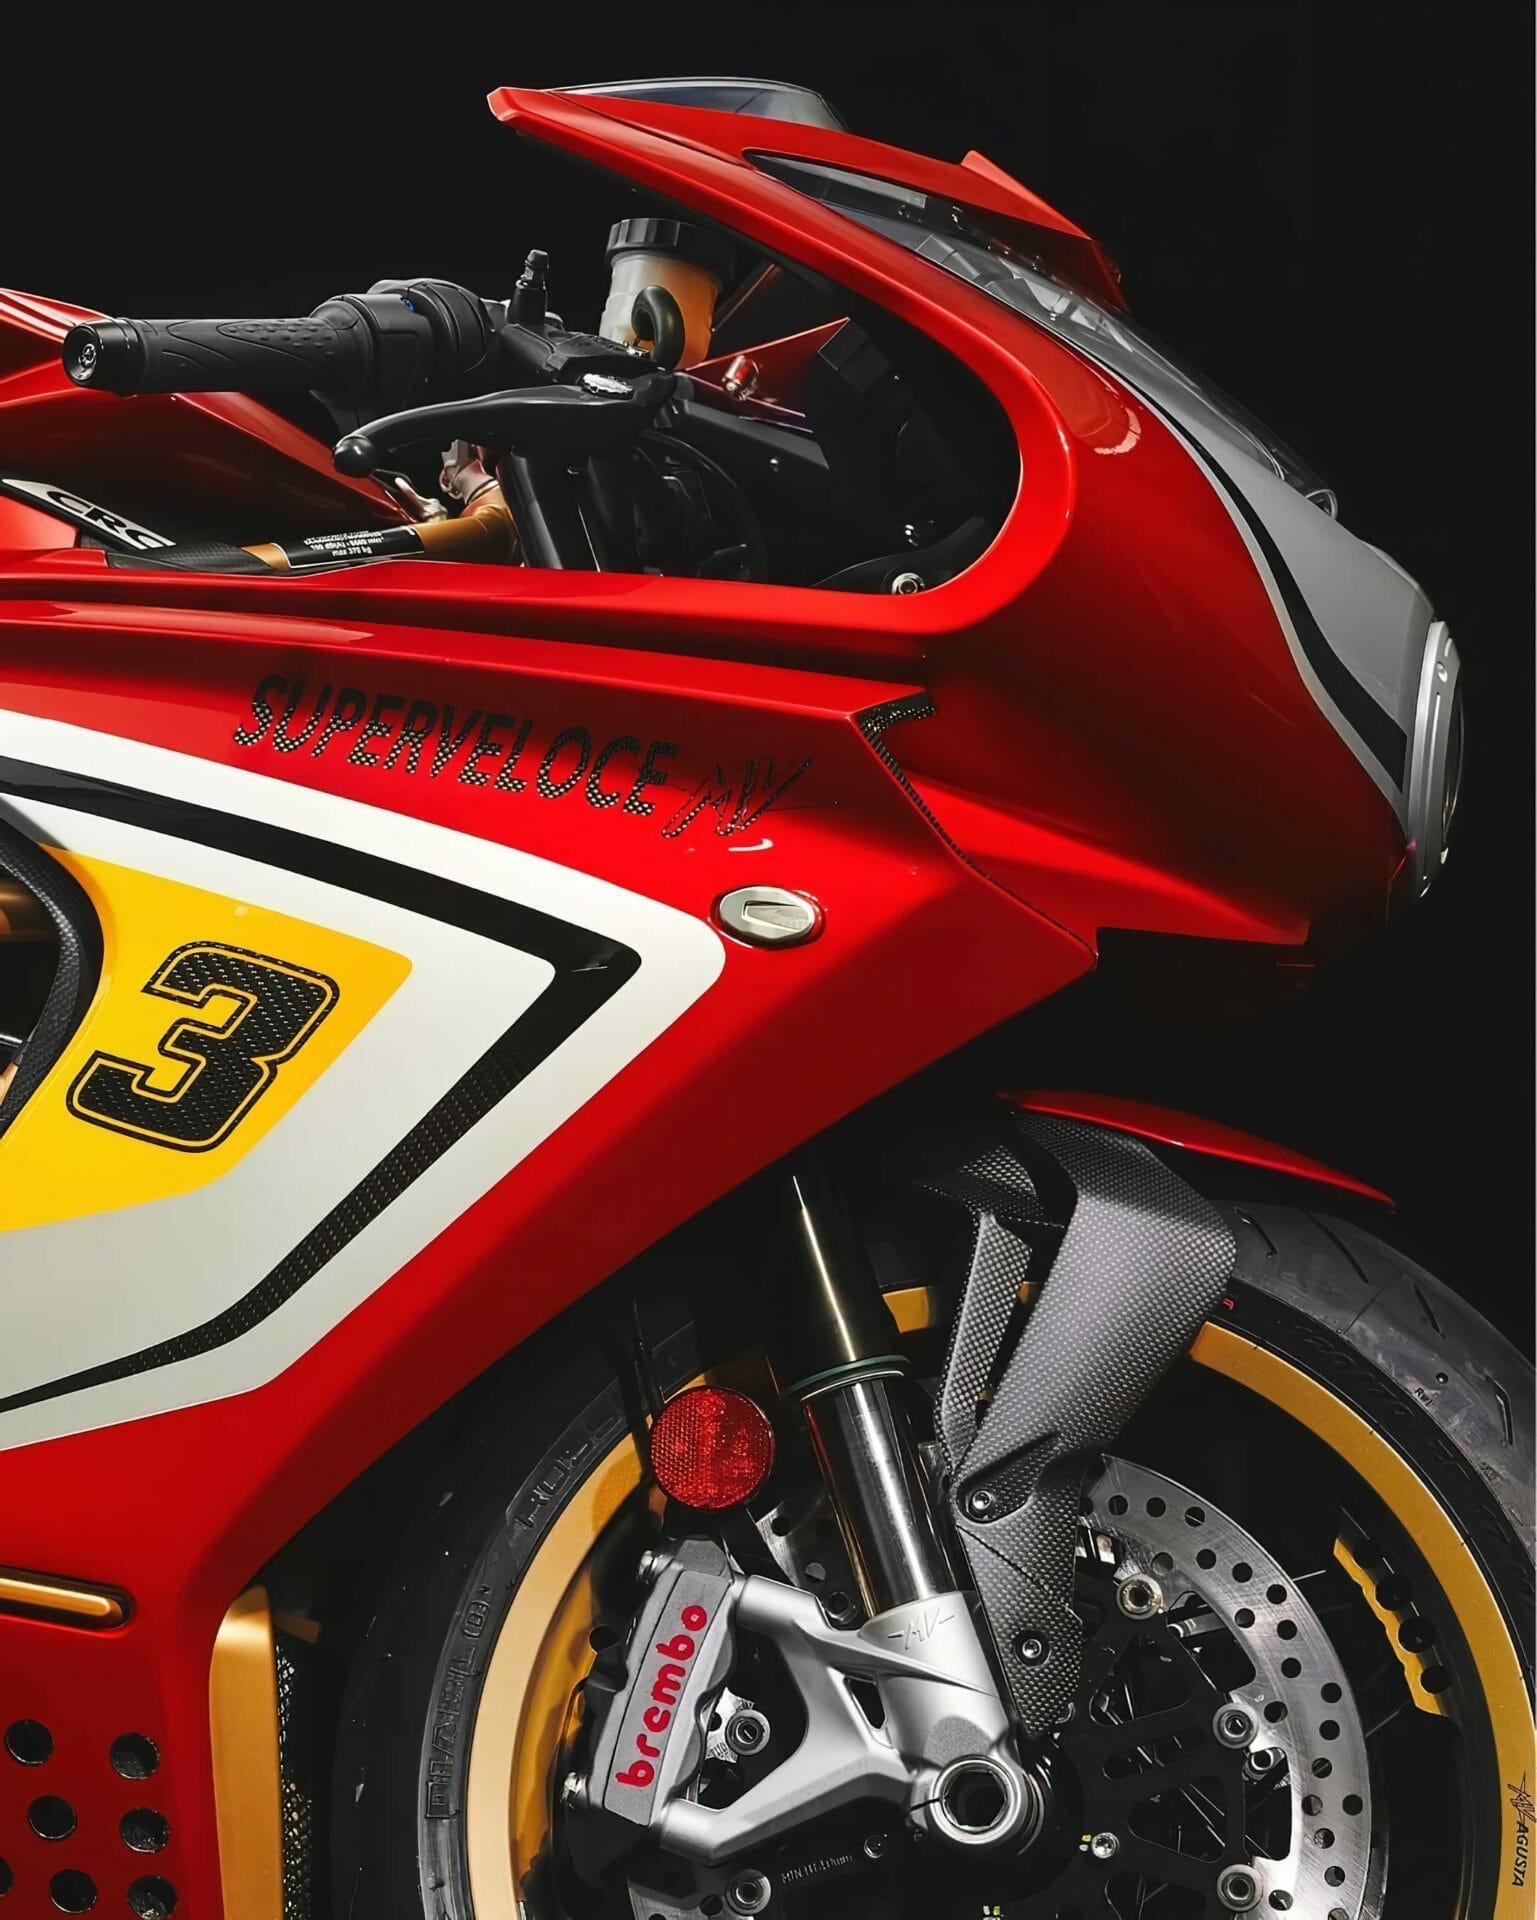 New details and pictures of the one-off MV Agusta Testalarga - MOTORCYCLES.NEWS